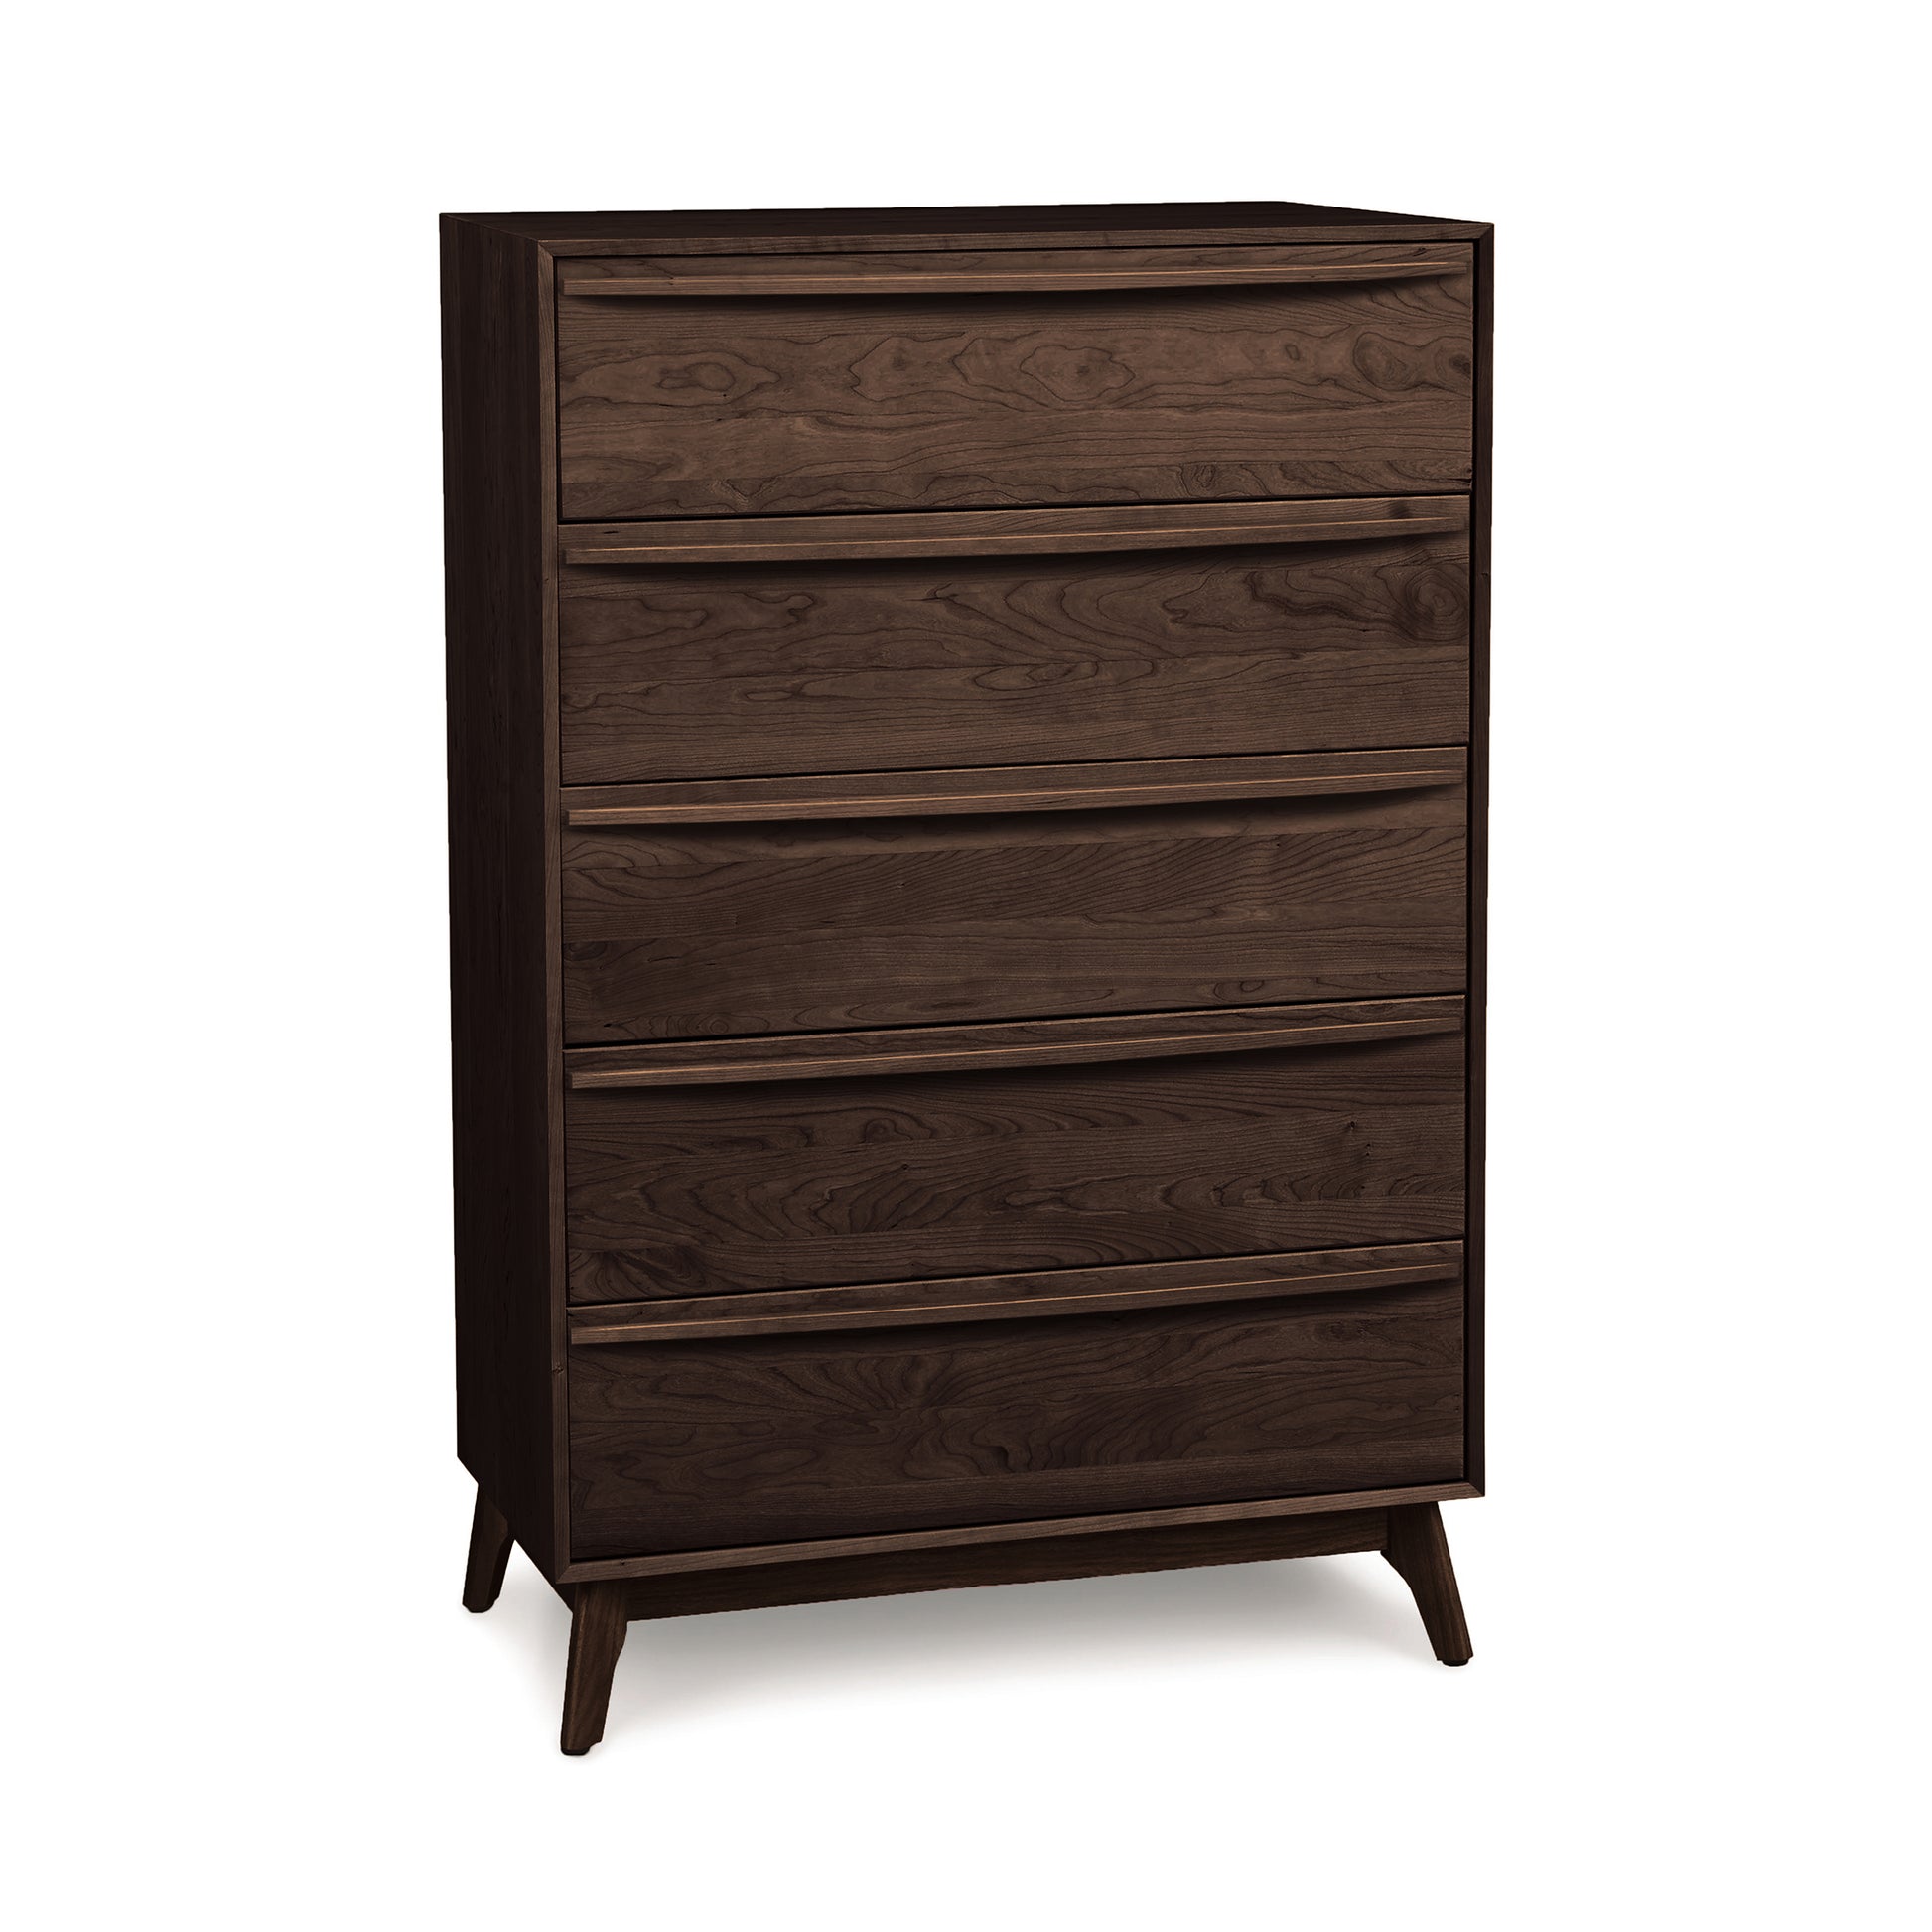 A dark brown, mid-century modern style wooden five-drawer dresser from the Copeland Furniture Catalina 5-Drawer Wide Chest Collection on a white background.